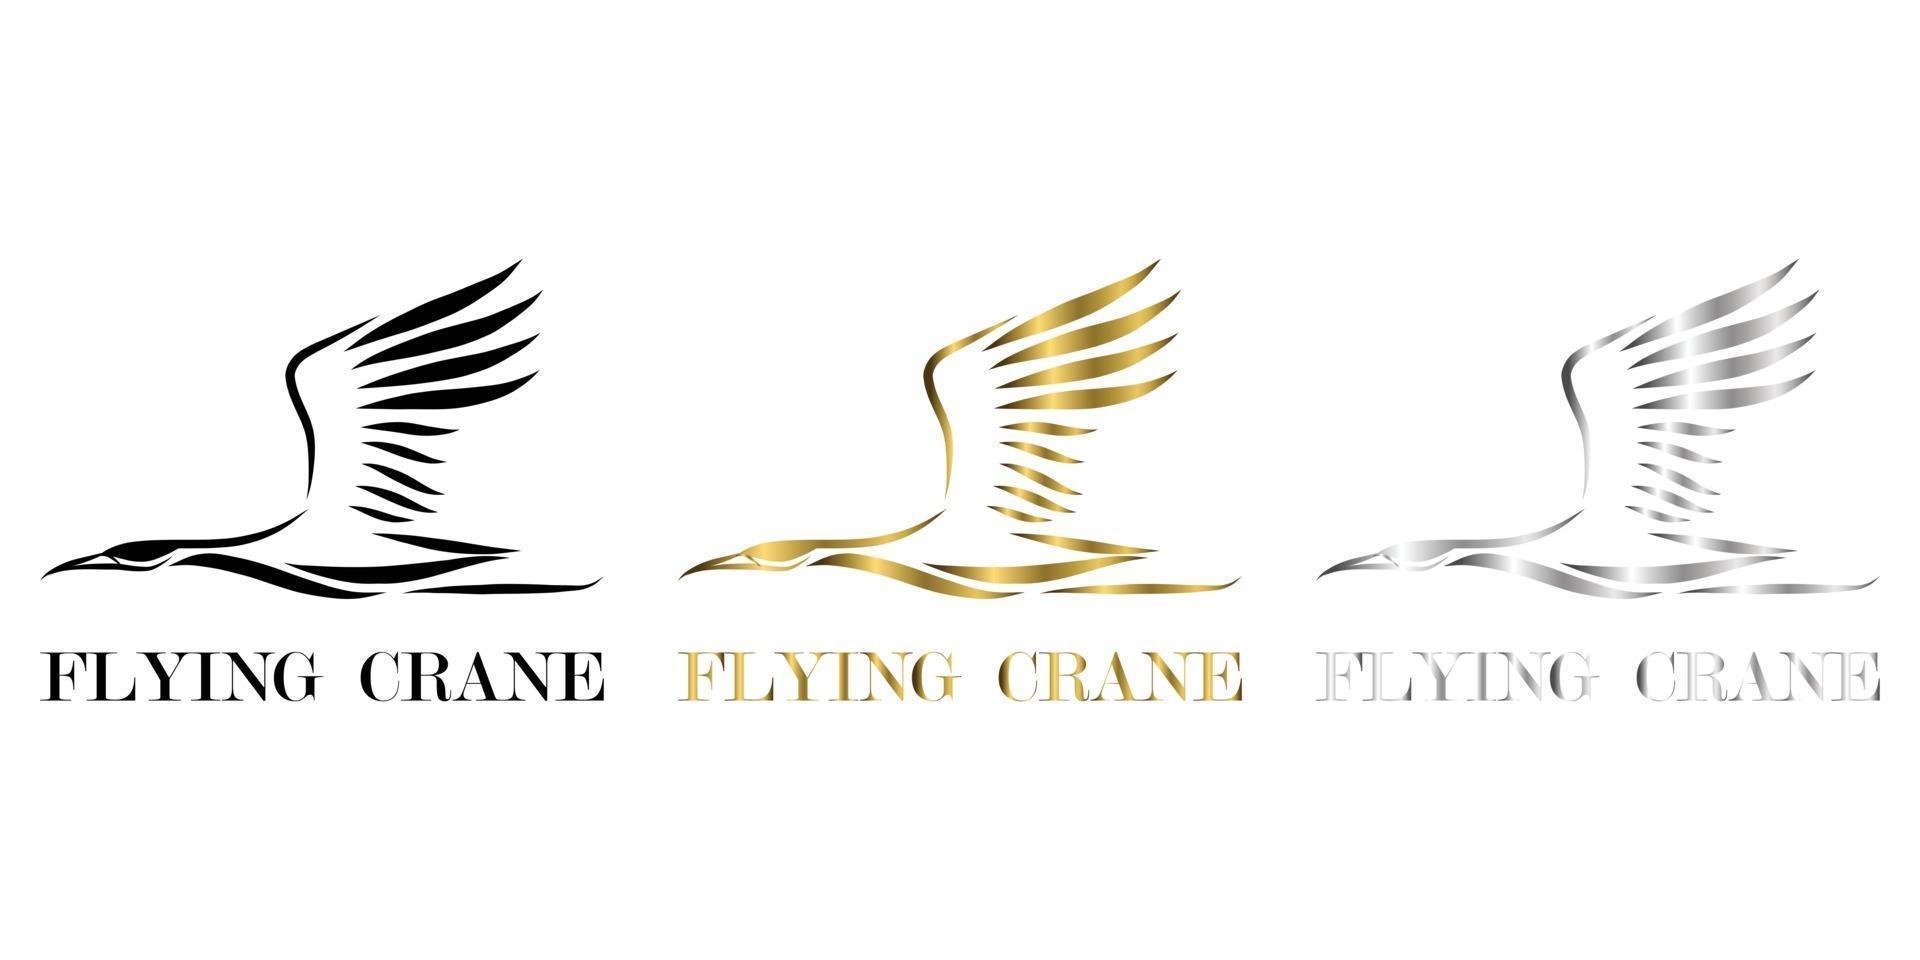 Line art vector logo of crane that is flying three color black gold silver